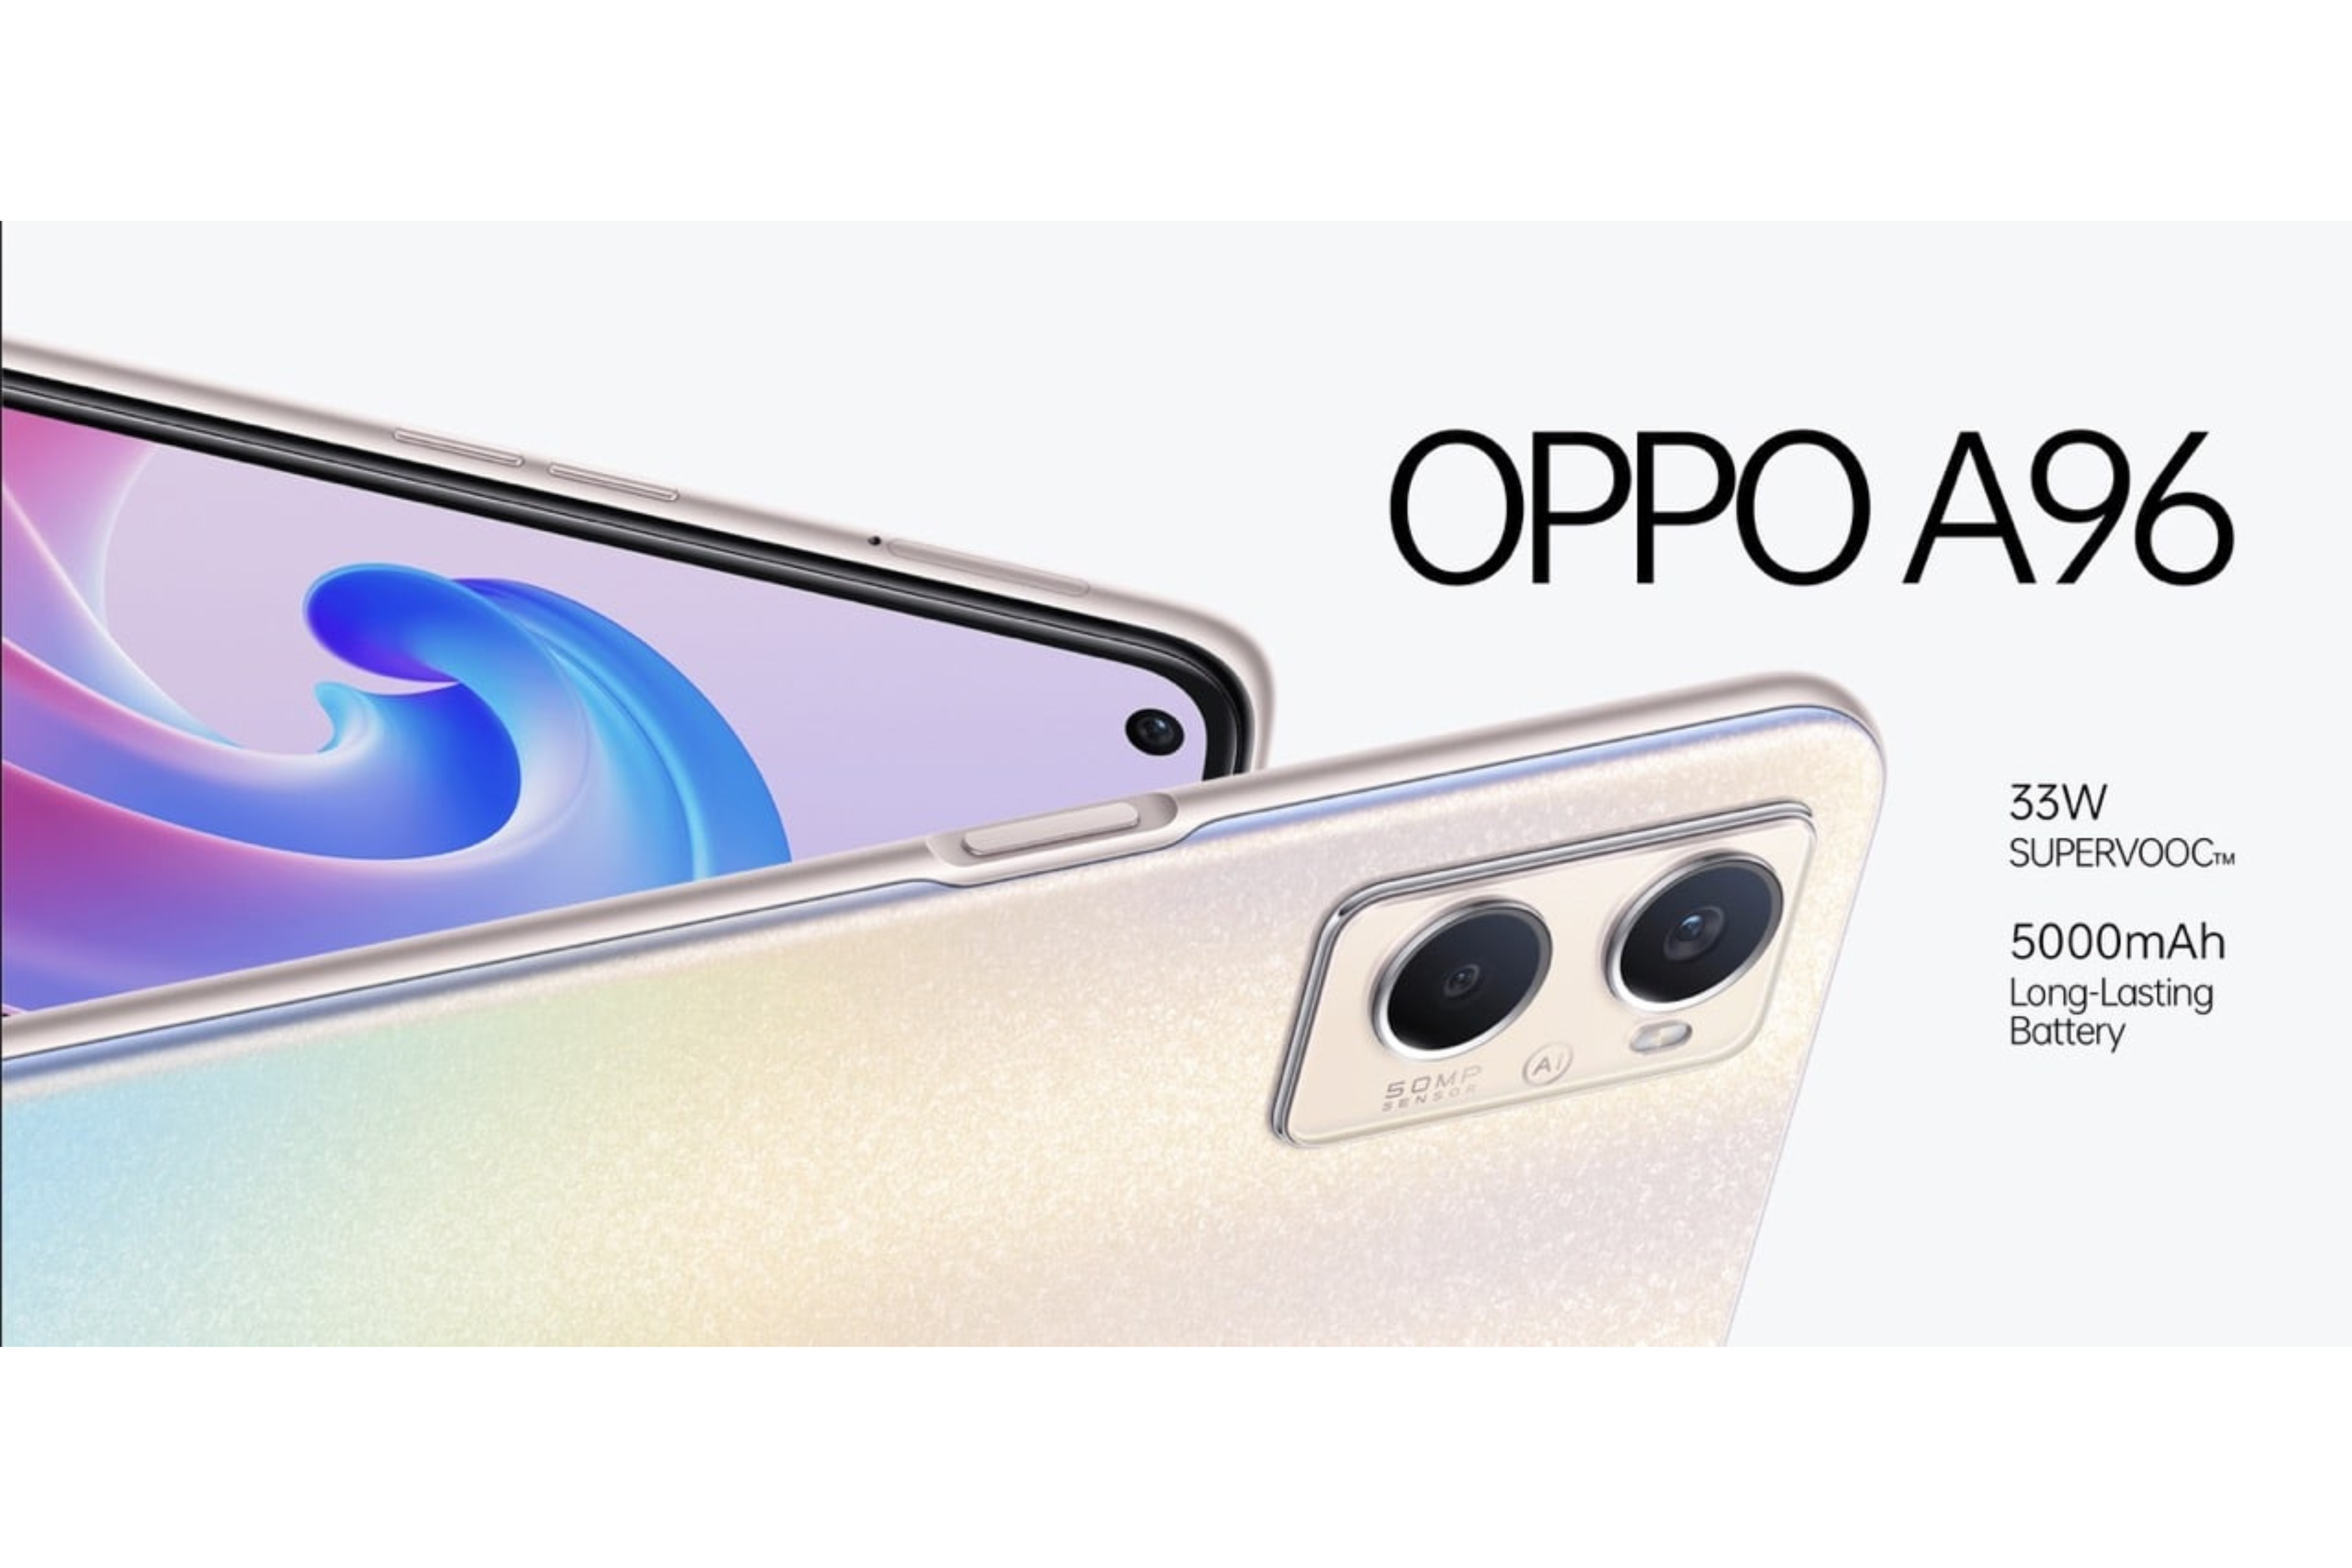 Oppo A96 Price in Pakistan